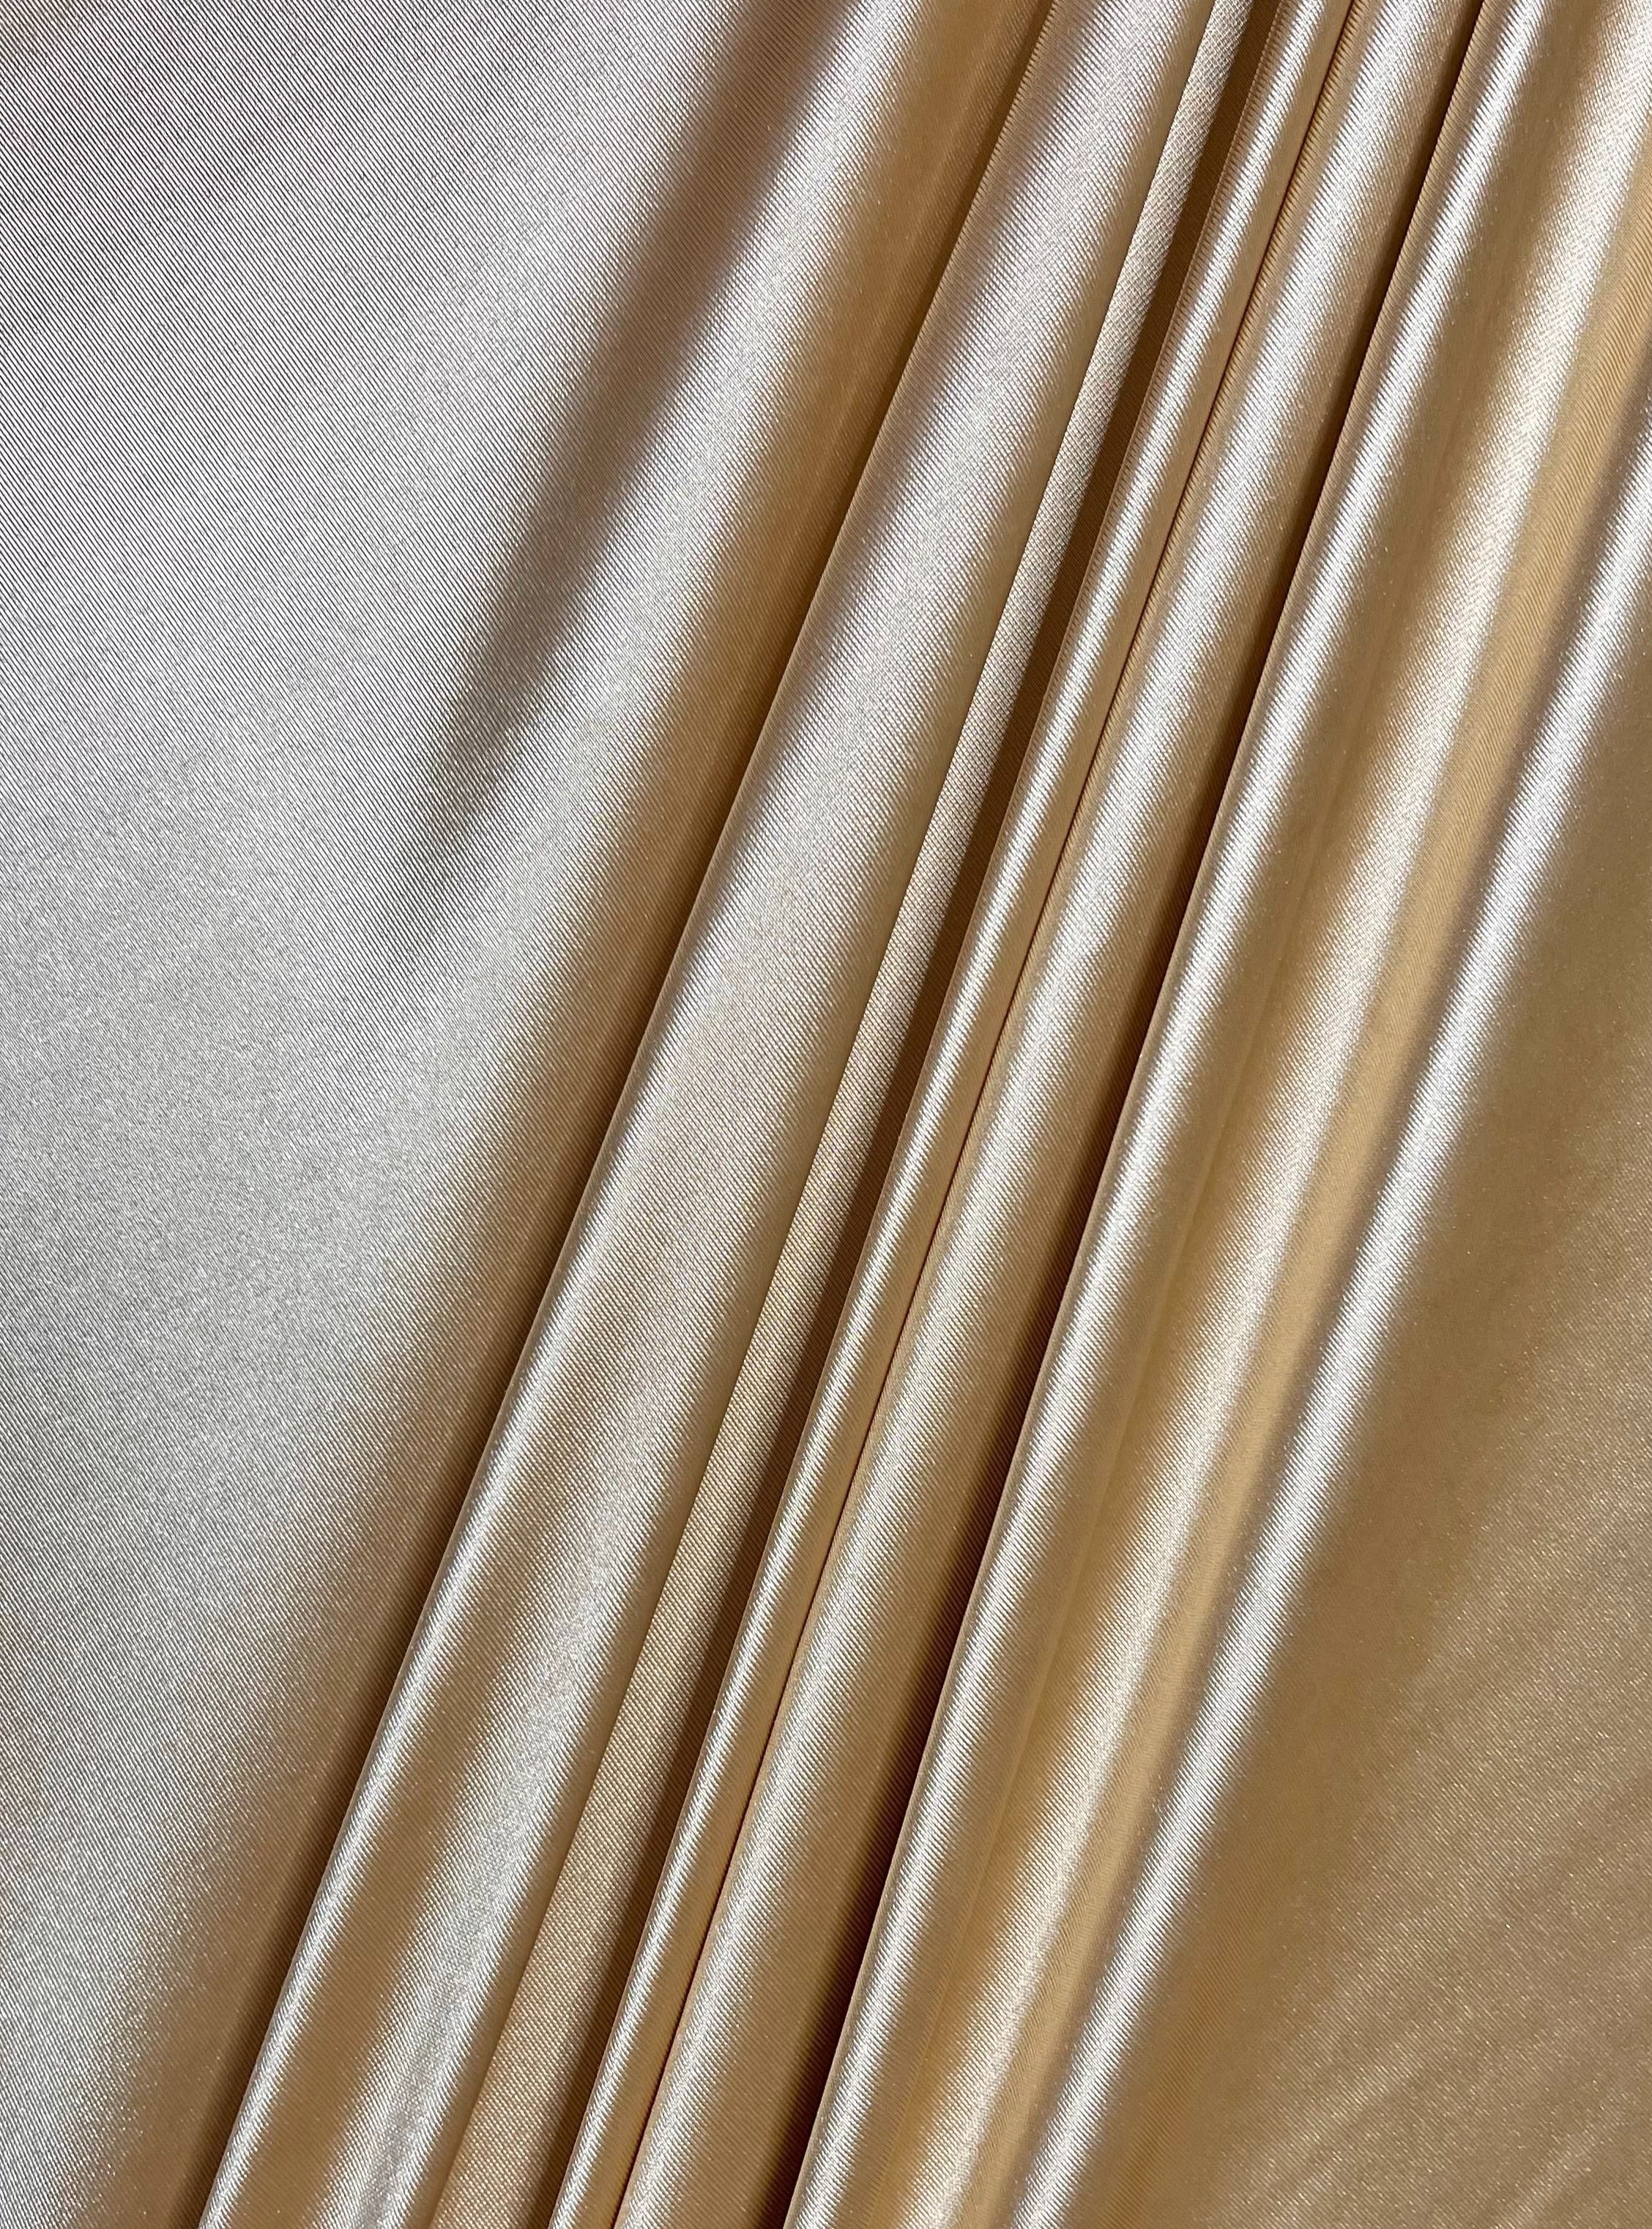 taupe nylon spandex, taupe color fabric, gold nylon spandex, light gold spandex, gold stretch fabric, gold fabric for legging, fabric wholesale USA, online fabric for legging, 4 way stretch fabric,premium nylon spandex, nylon spandex for woman, nylon spandex for bride, nylon spandex on discount, nylon spandex on sale, buy nylon spandex online 